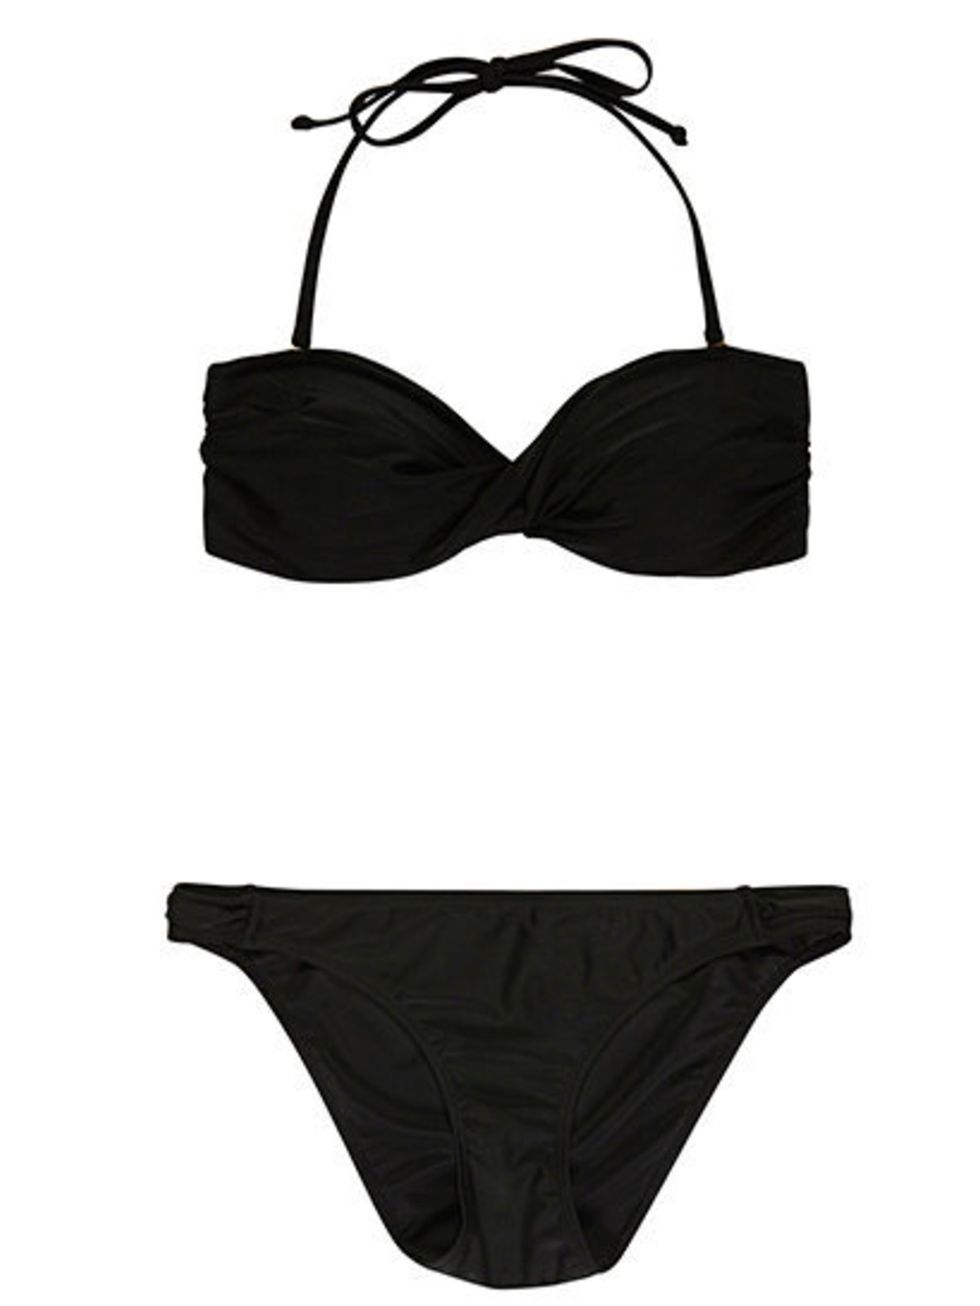 <p>Everyone needs at least one black bikini in their wardrobe. News and Social Media Editor Leisa Barnett, likes the look of this one from Warehouse. <a href="http://www.warehouse.co.uk/twist-front-bandeau-bikini/beachwear/warehouse/fcp-product/4022897277